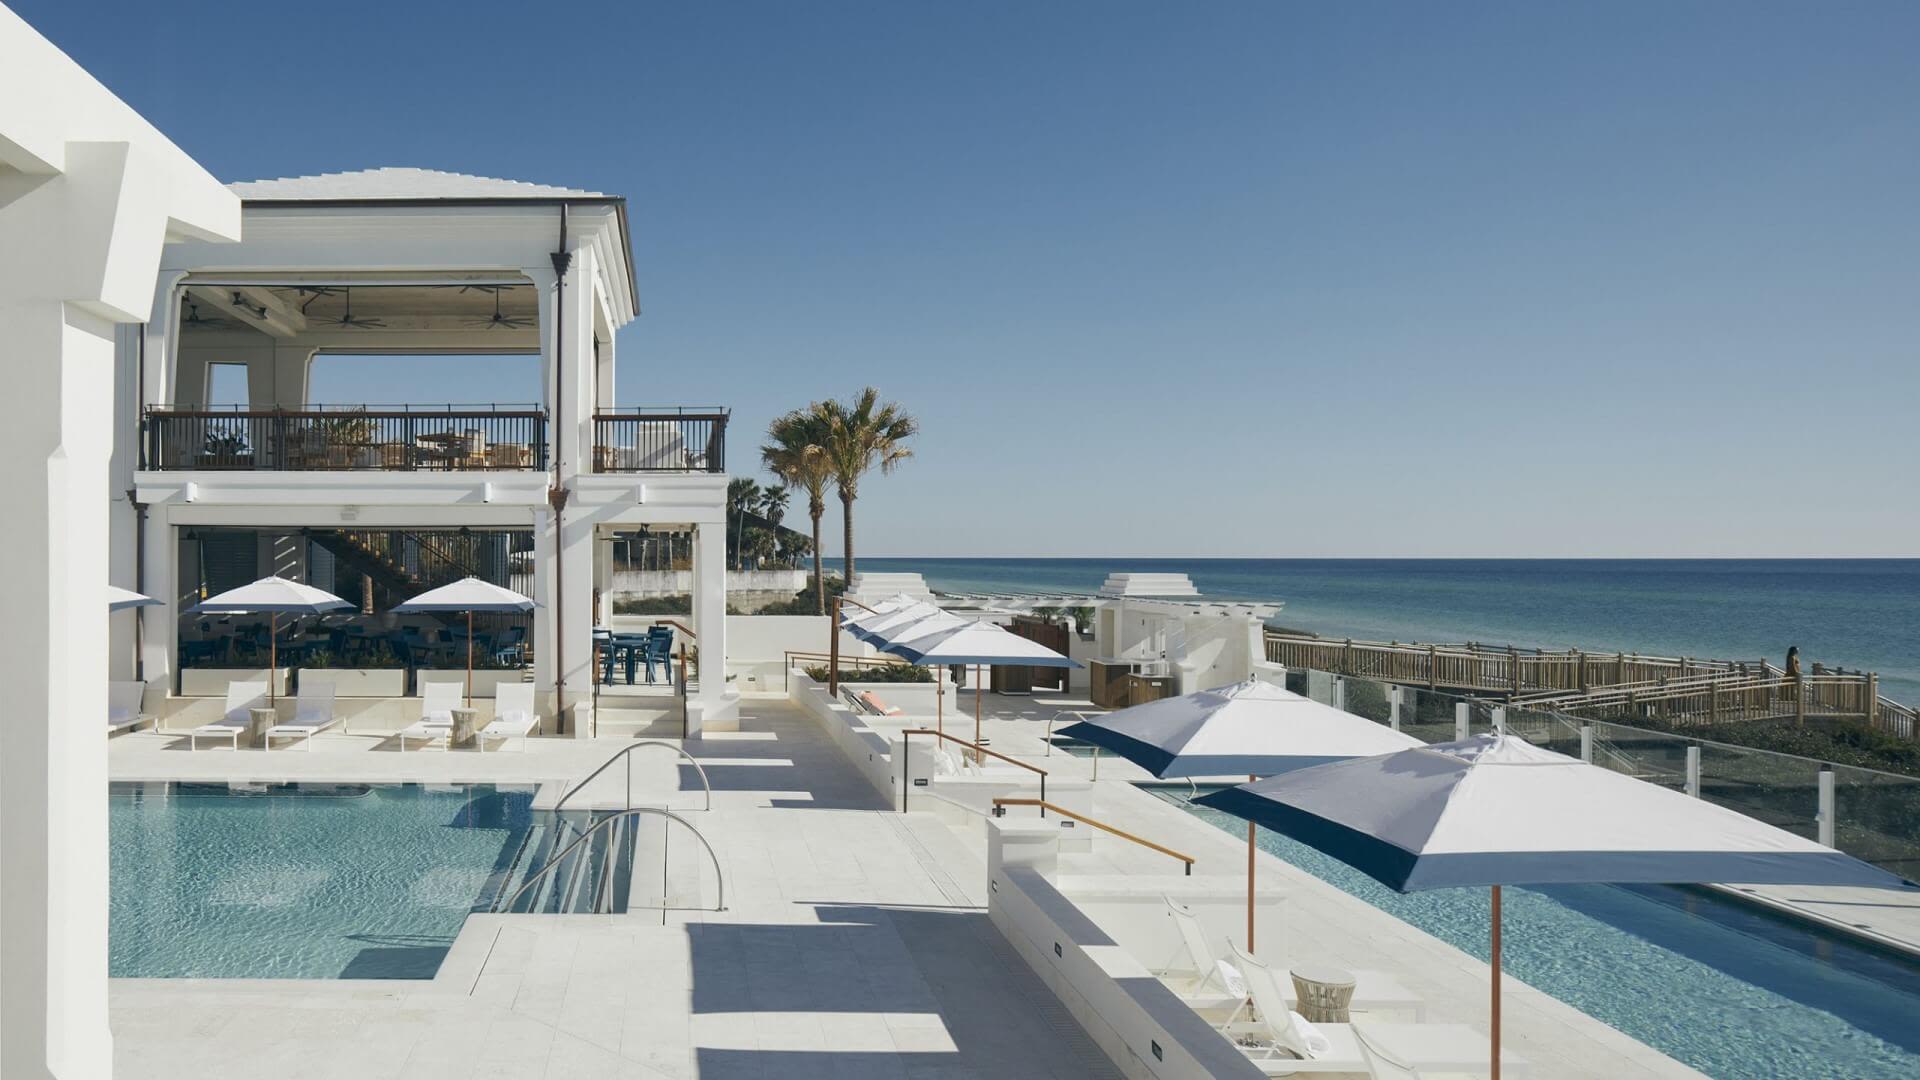 ALYS BEACH a coveted piece of paradise in NW Florida